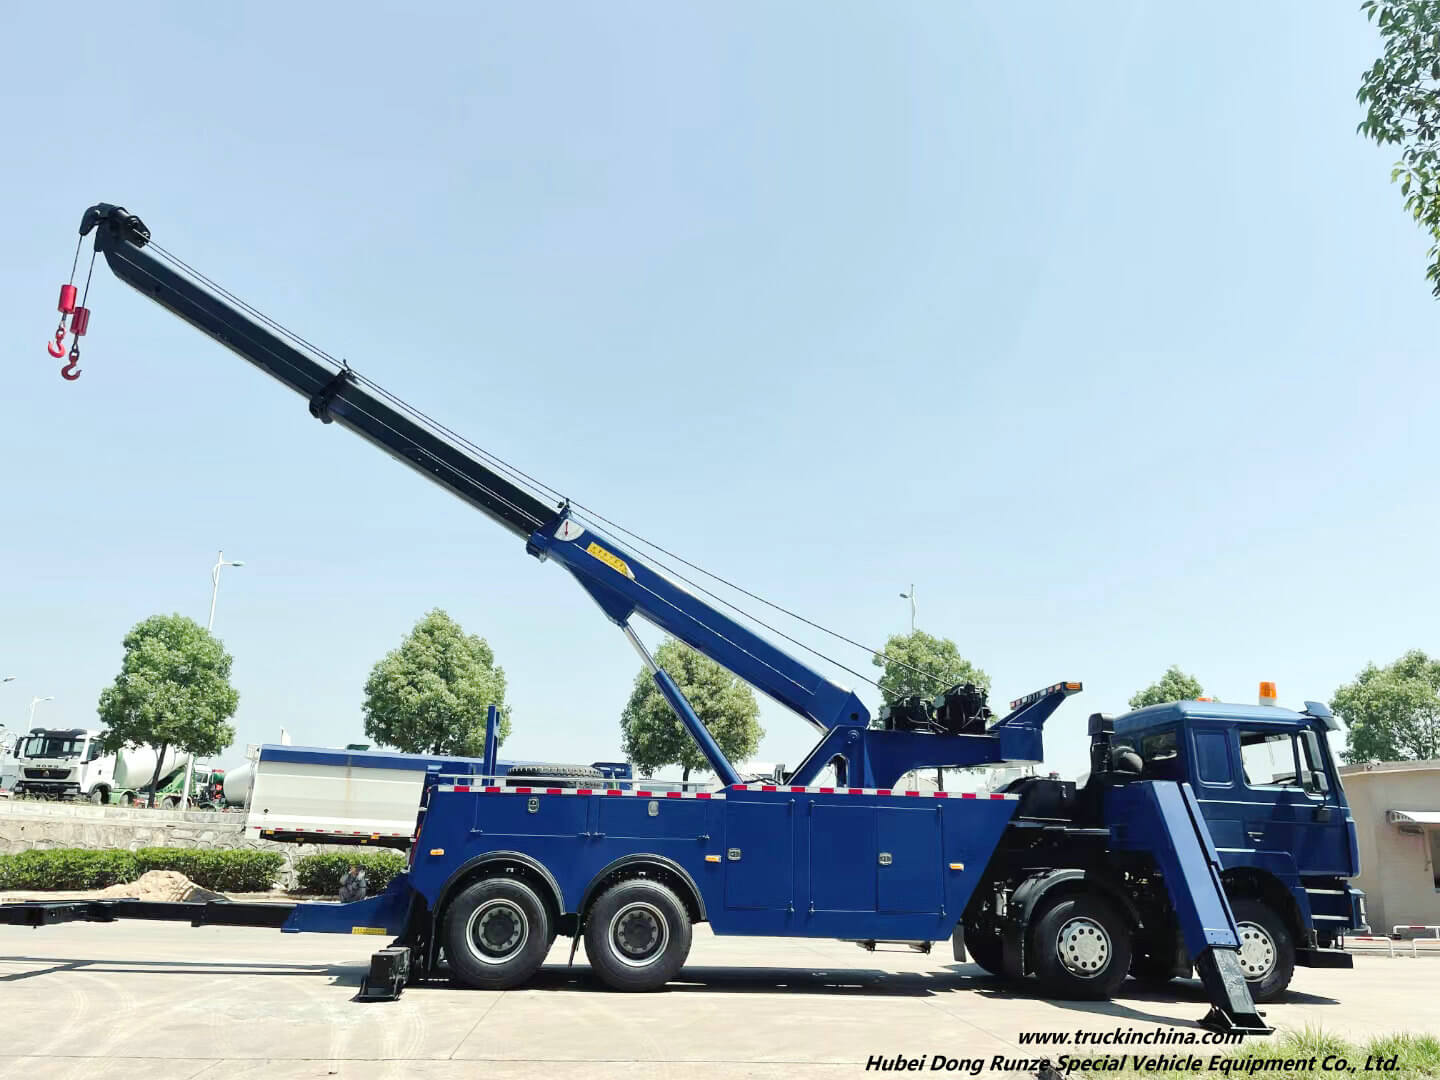 SHACMAN 50T Rotator Wrecker Tow Truck for Breakdown Bus Trailer Rescue with Two Hydraulic Winch 250KN Towing 50T 